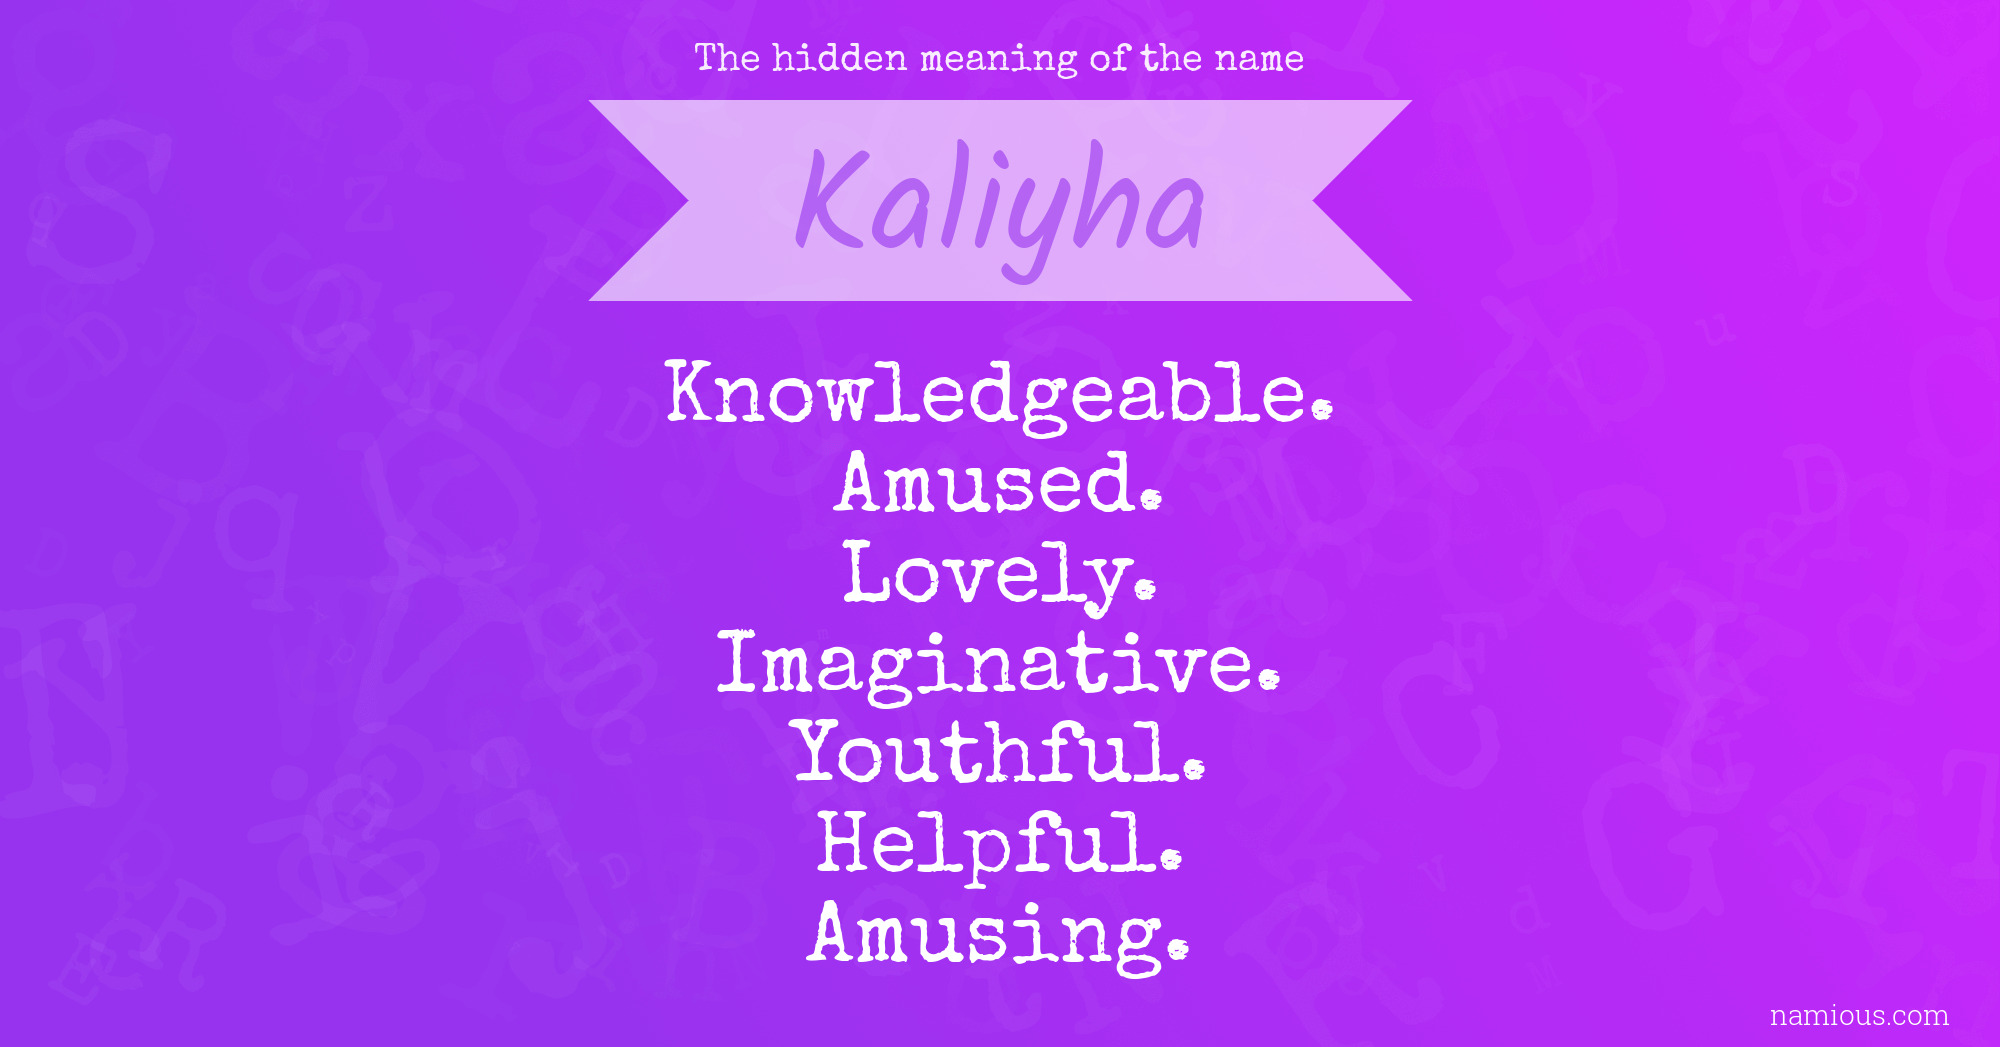 The hidden meaning of the name Kaliyha